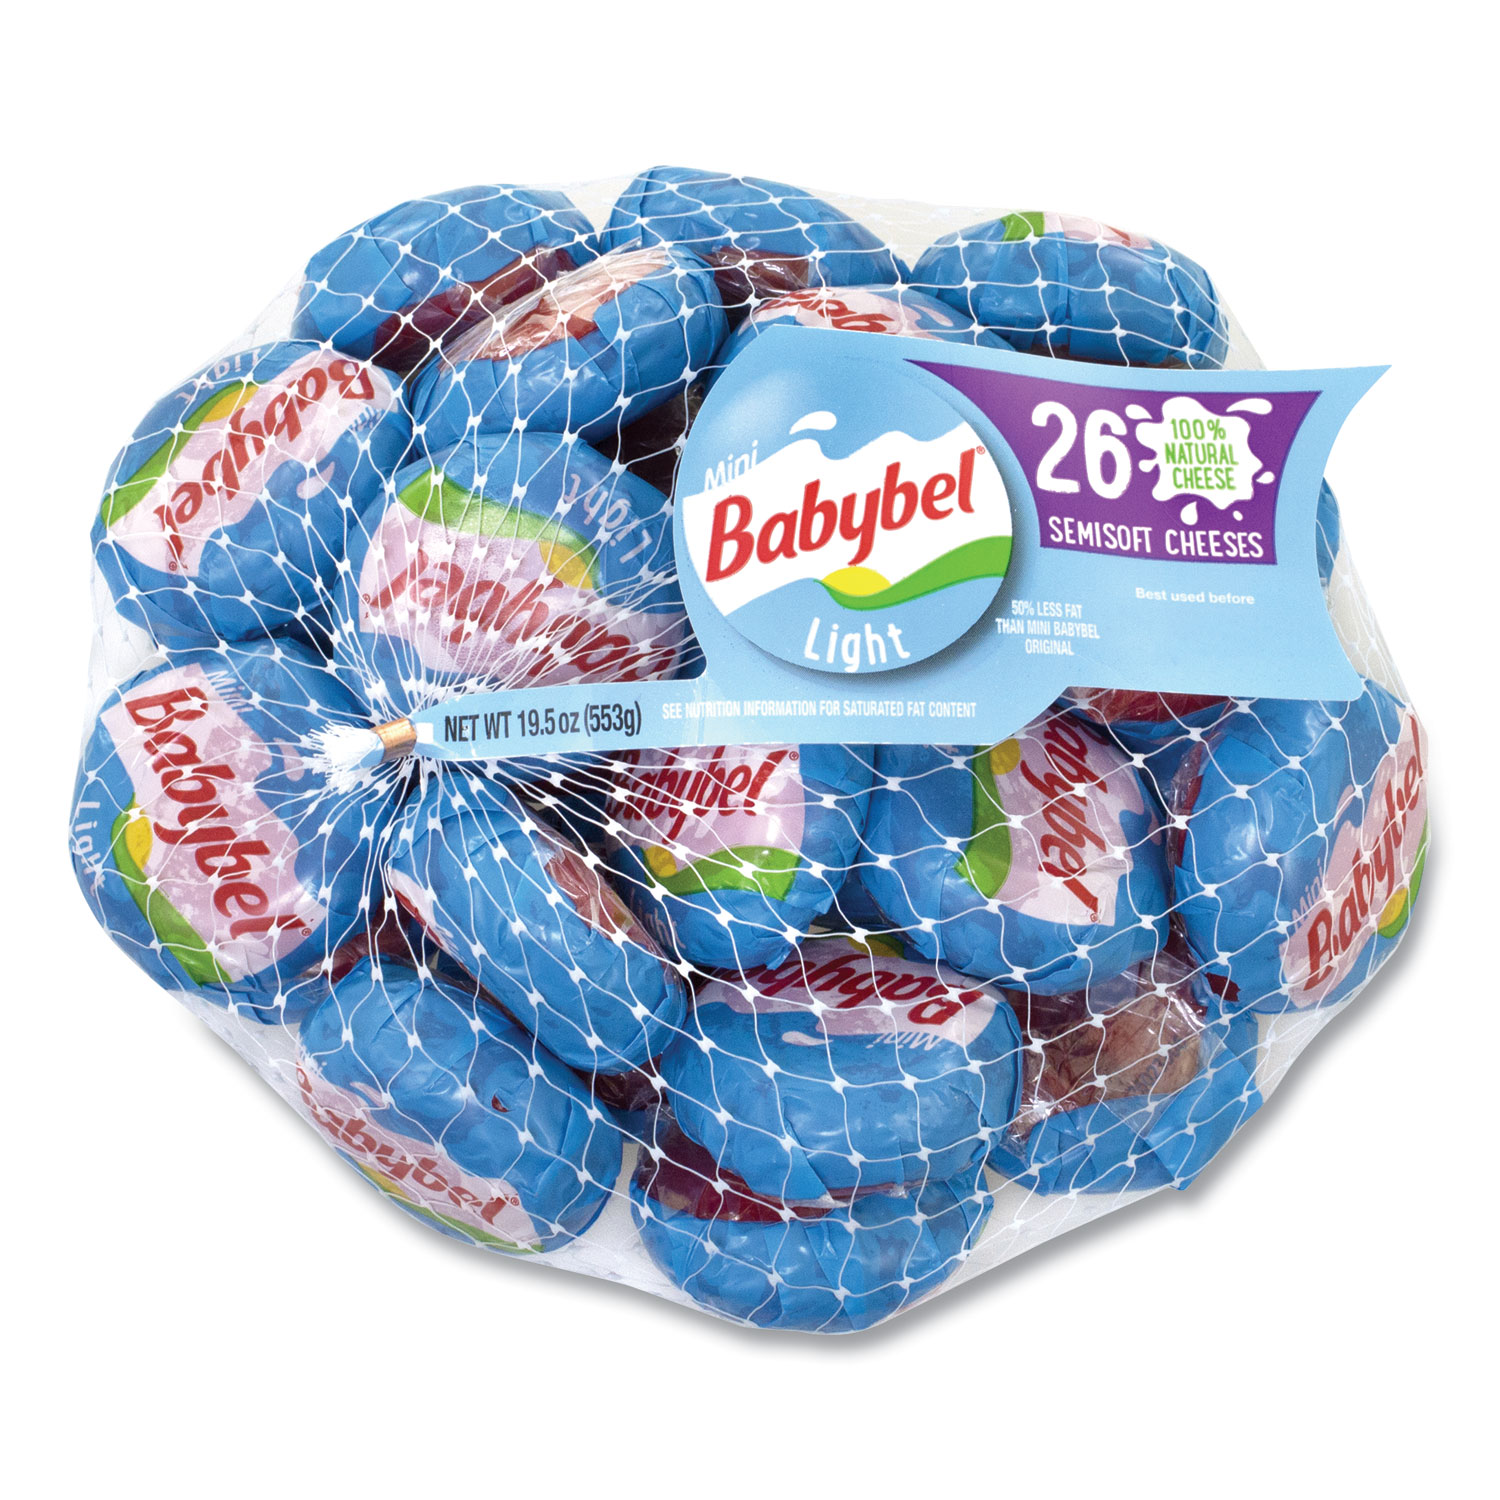  Mini Babybel 192 Cheese Wheels, Light, 19.5 oz Bag, 26 Wheels/Bag, Free Delivery in 1-4 Business Days (GRR90200029) 